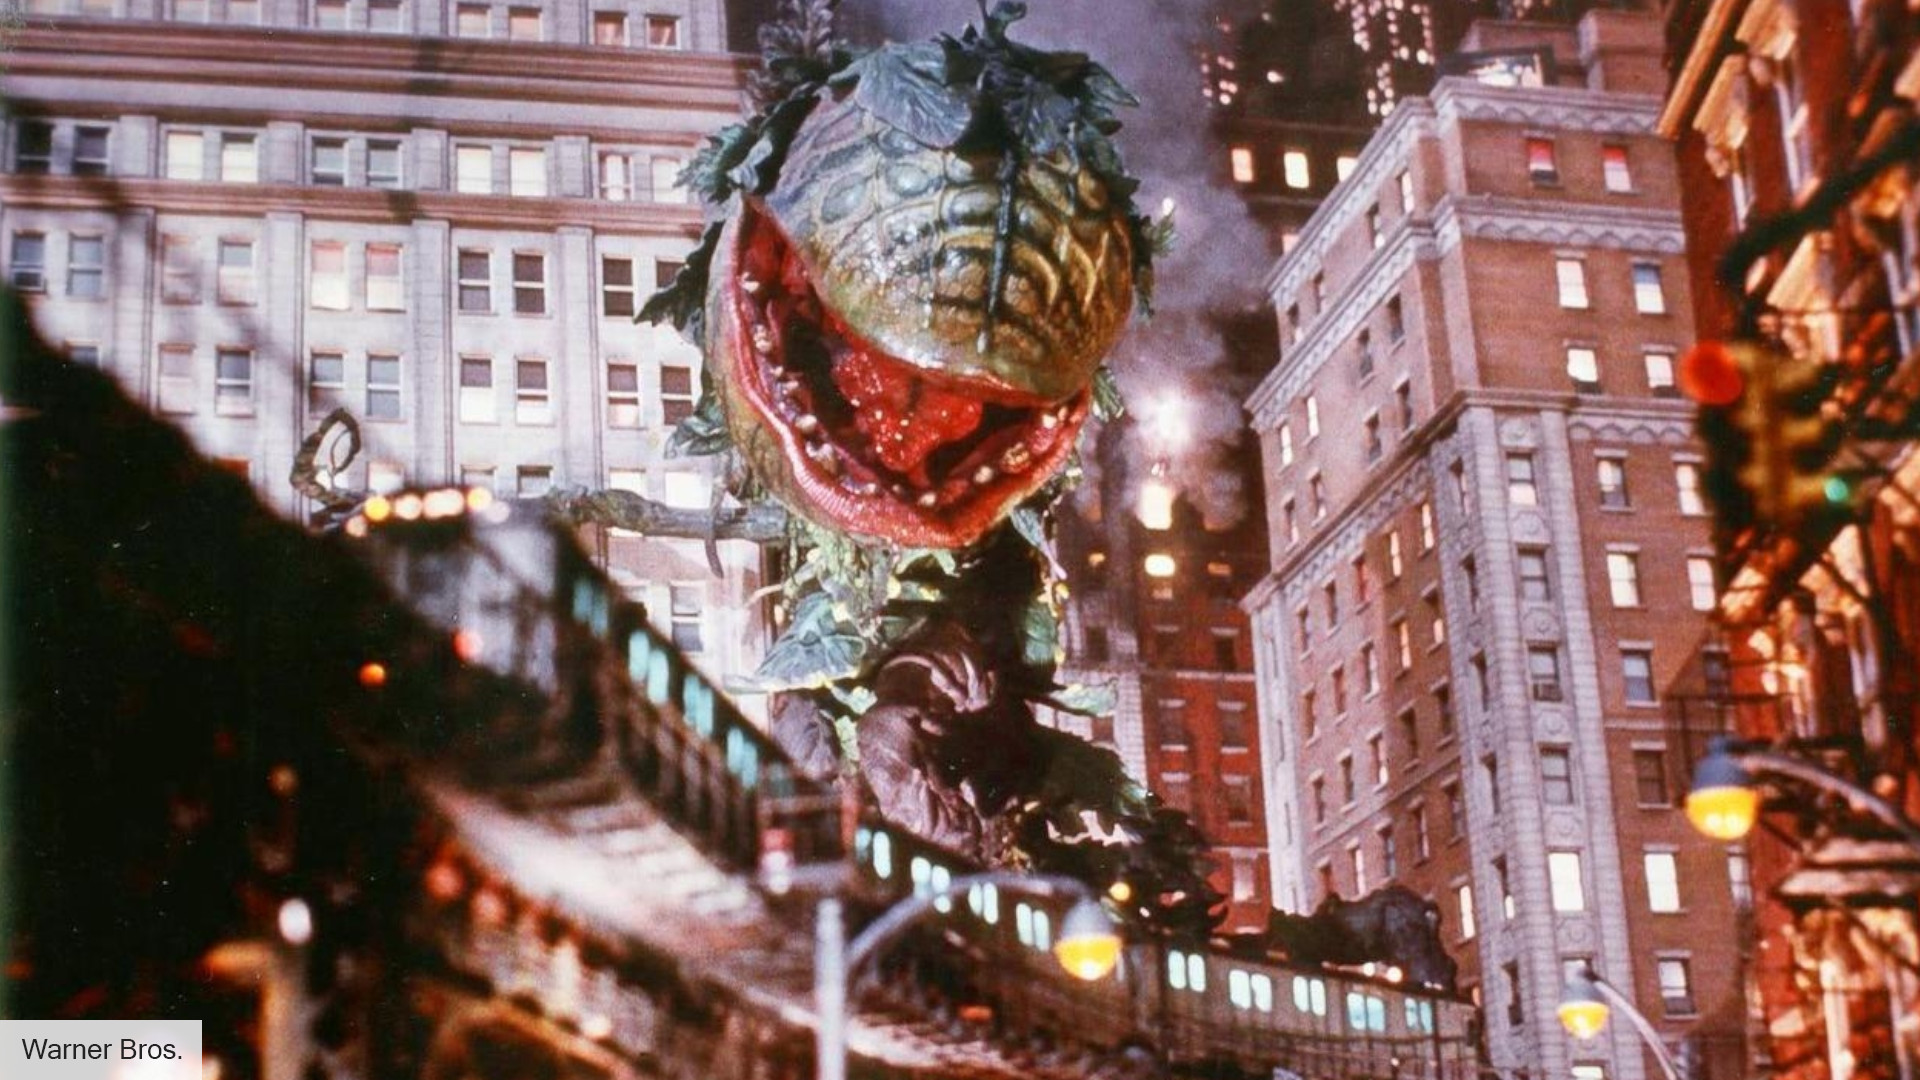 Why the Little Shop of Horrors director’s cut almost ruins the movie